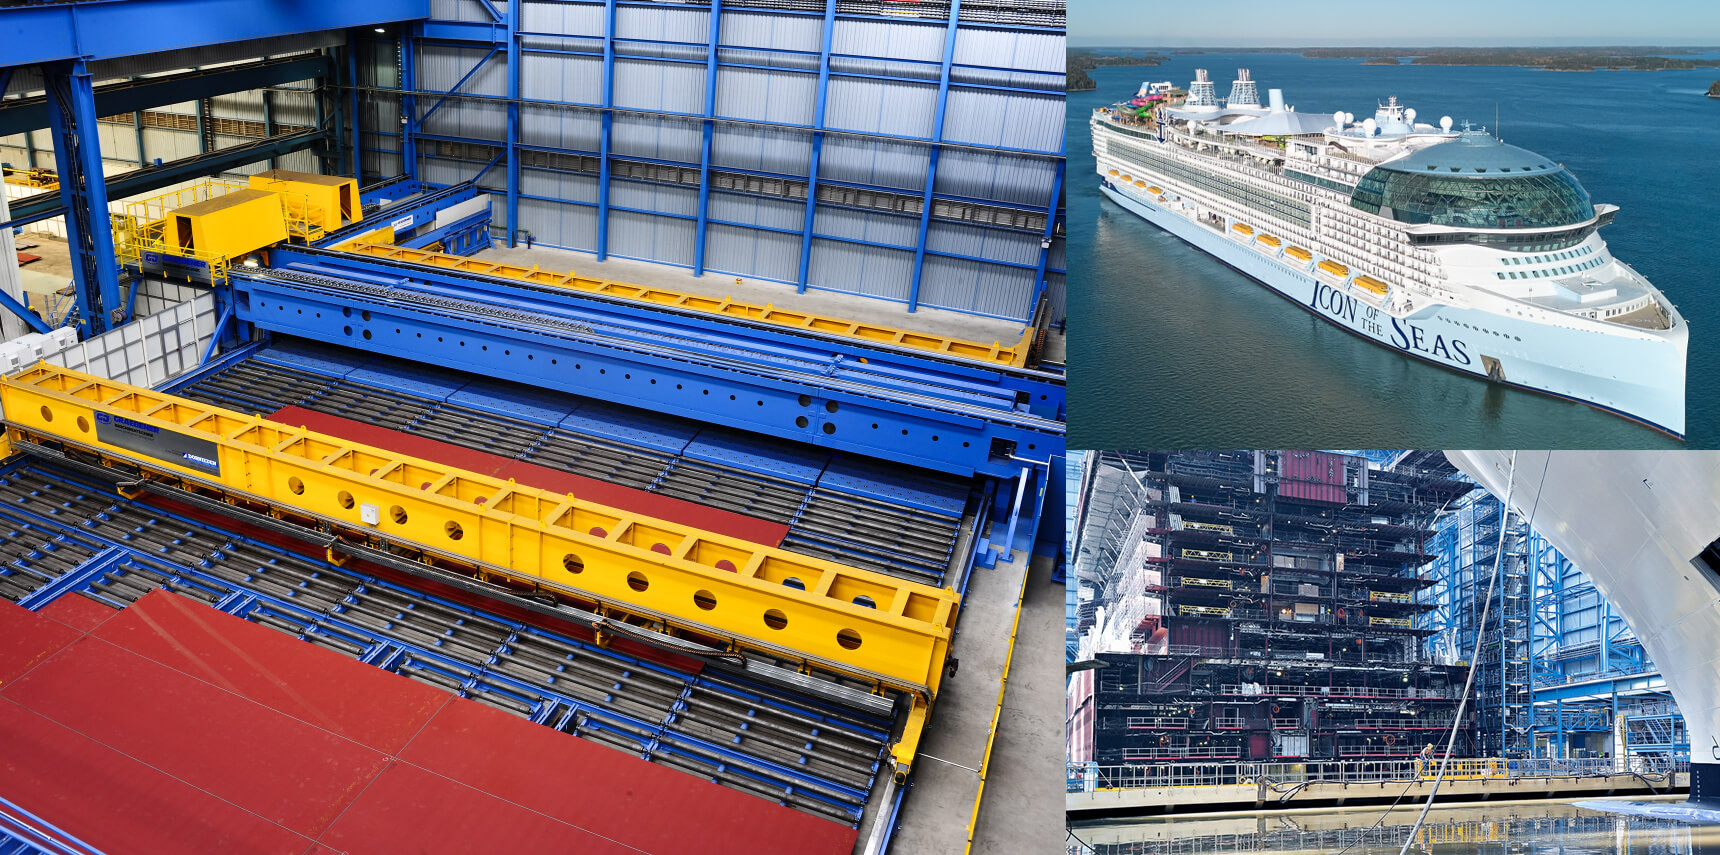 Graebener Panel Production Line, Carnival Jubilee from Meyer Werft, Ship Deck Sections